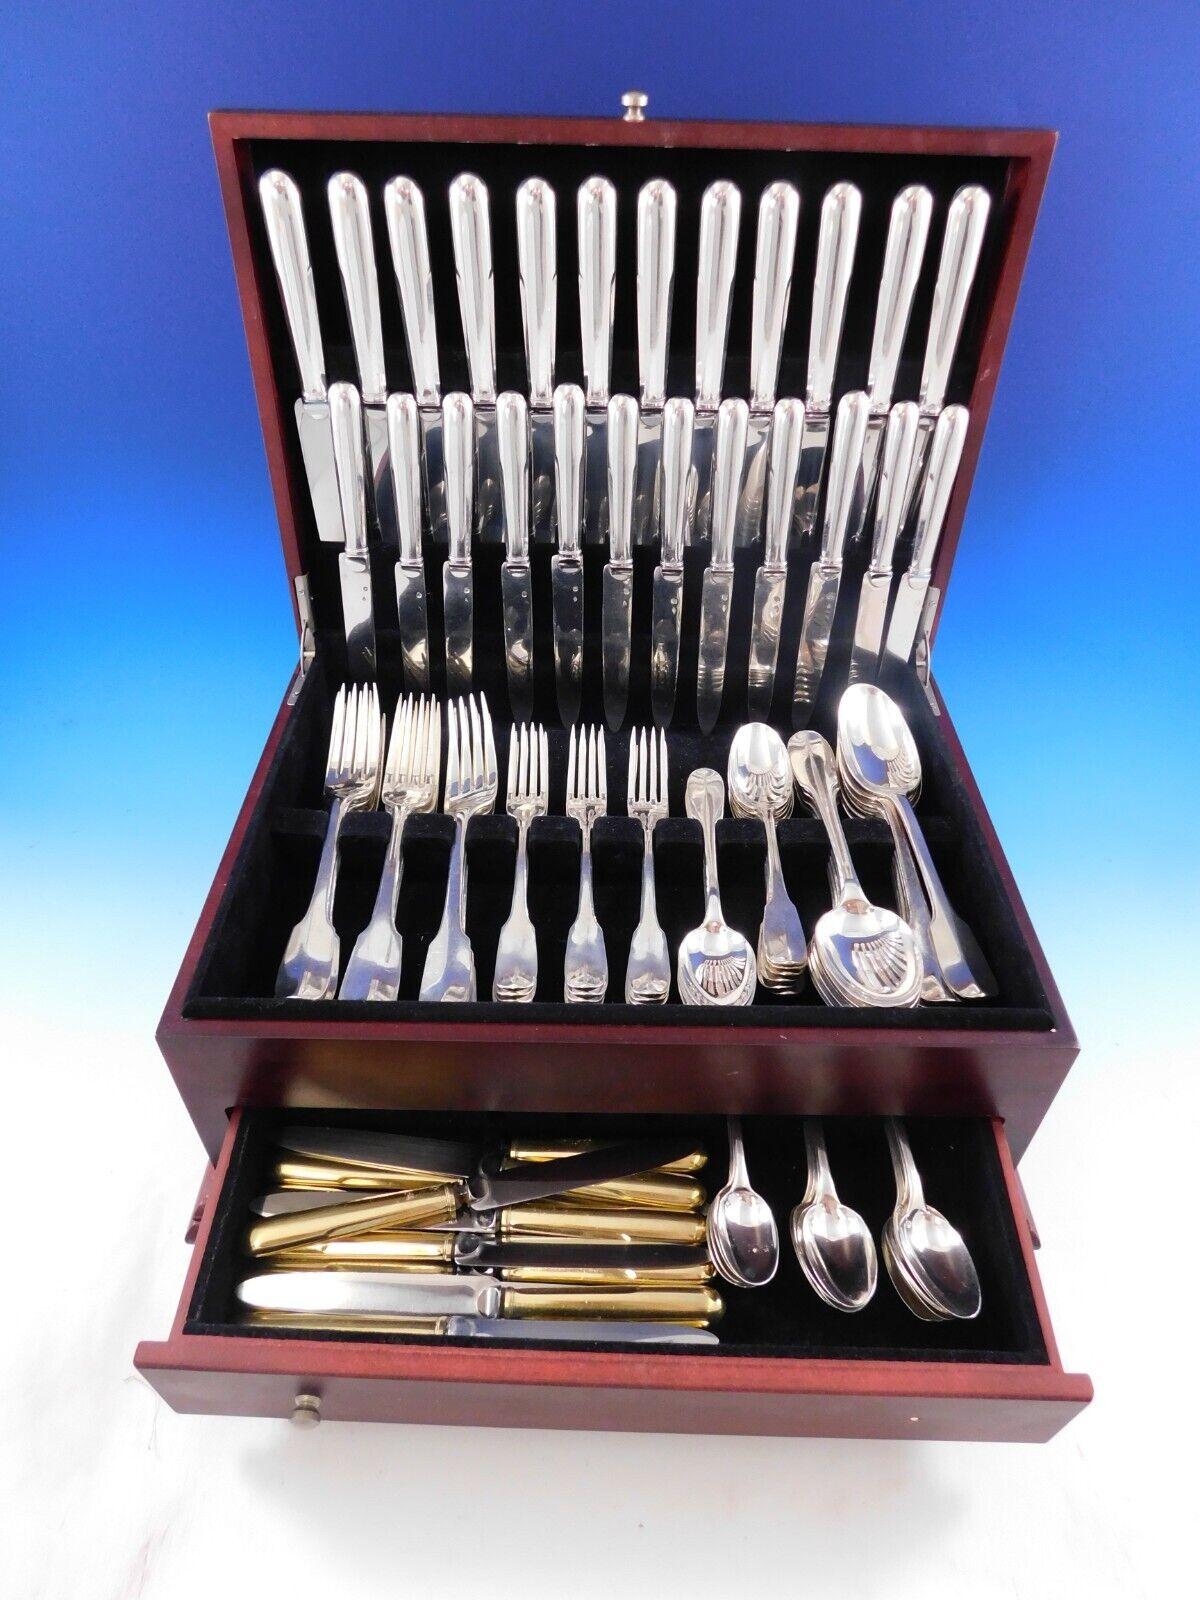 The Parisian silversmith Puiforcat is regarded as one of the legendary names in European silver craftsmanship. 
Superb Dinner Size Louvois by Puiforcat sterling silver flatware set, 104 pieces.This set includes:

12 dinner size knives, pointed, 9